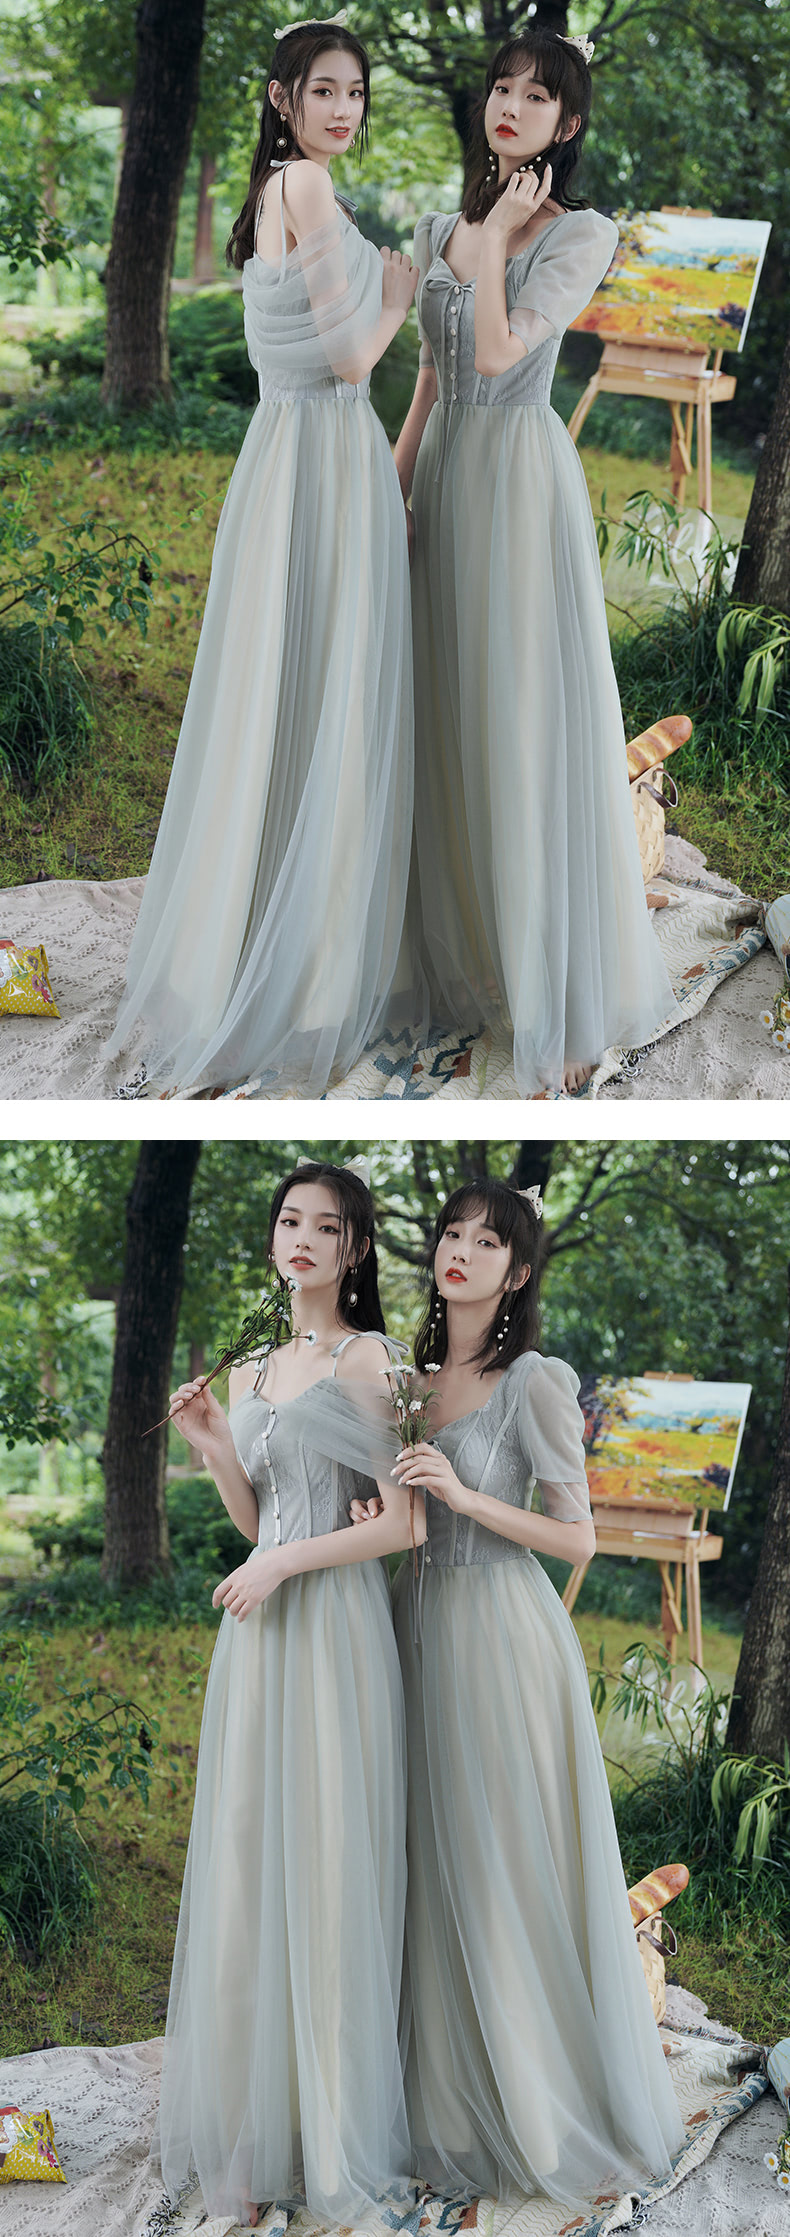 Beautiful-Greyish-Blue-Bridesmaid-Dress-Evening-Party-Formal-Outfit13